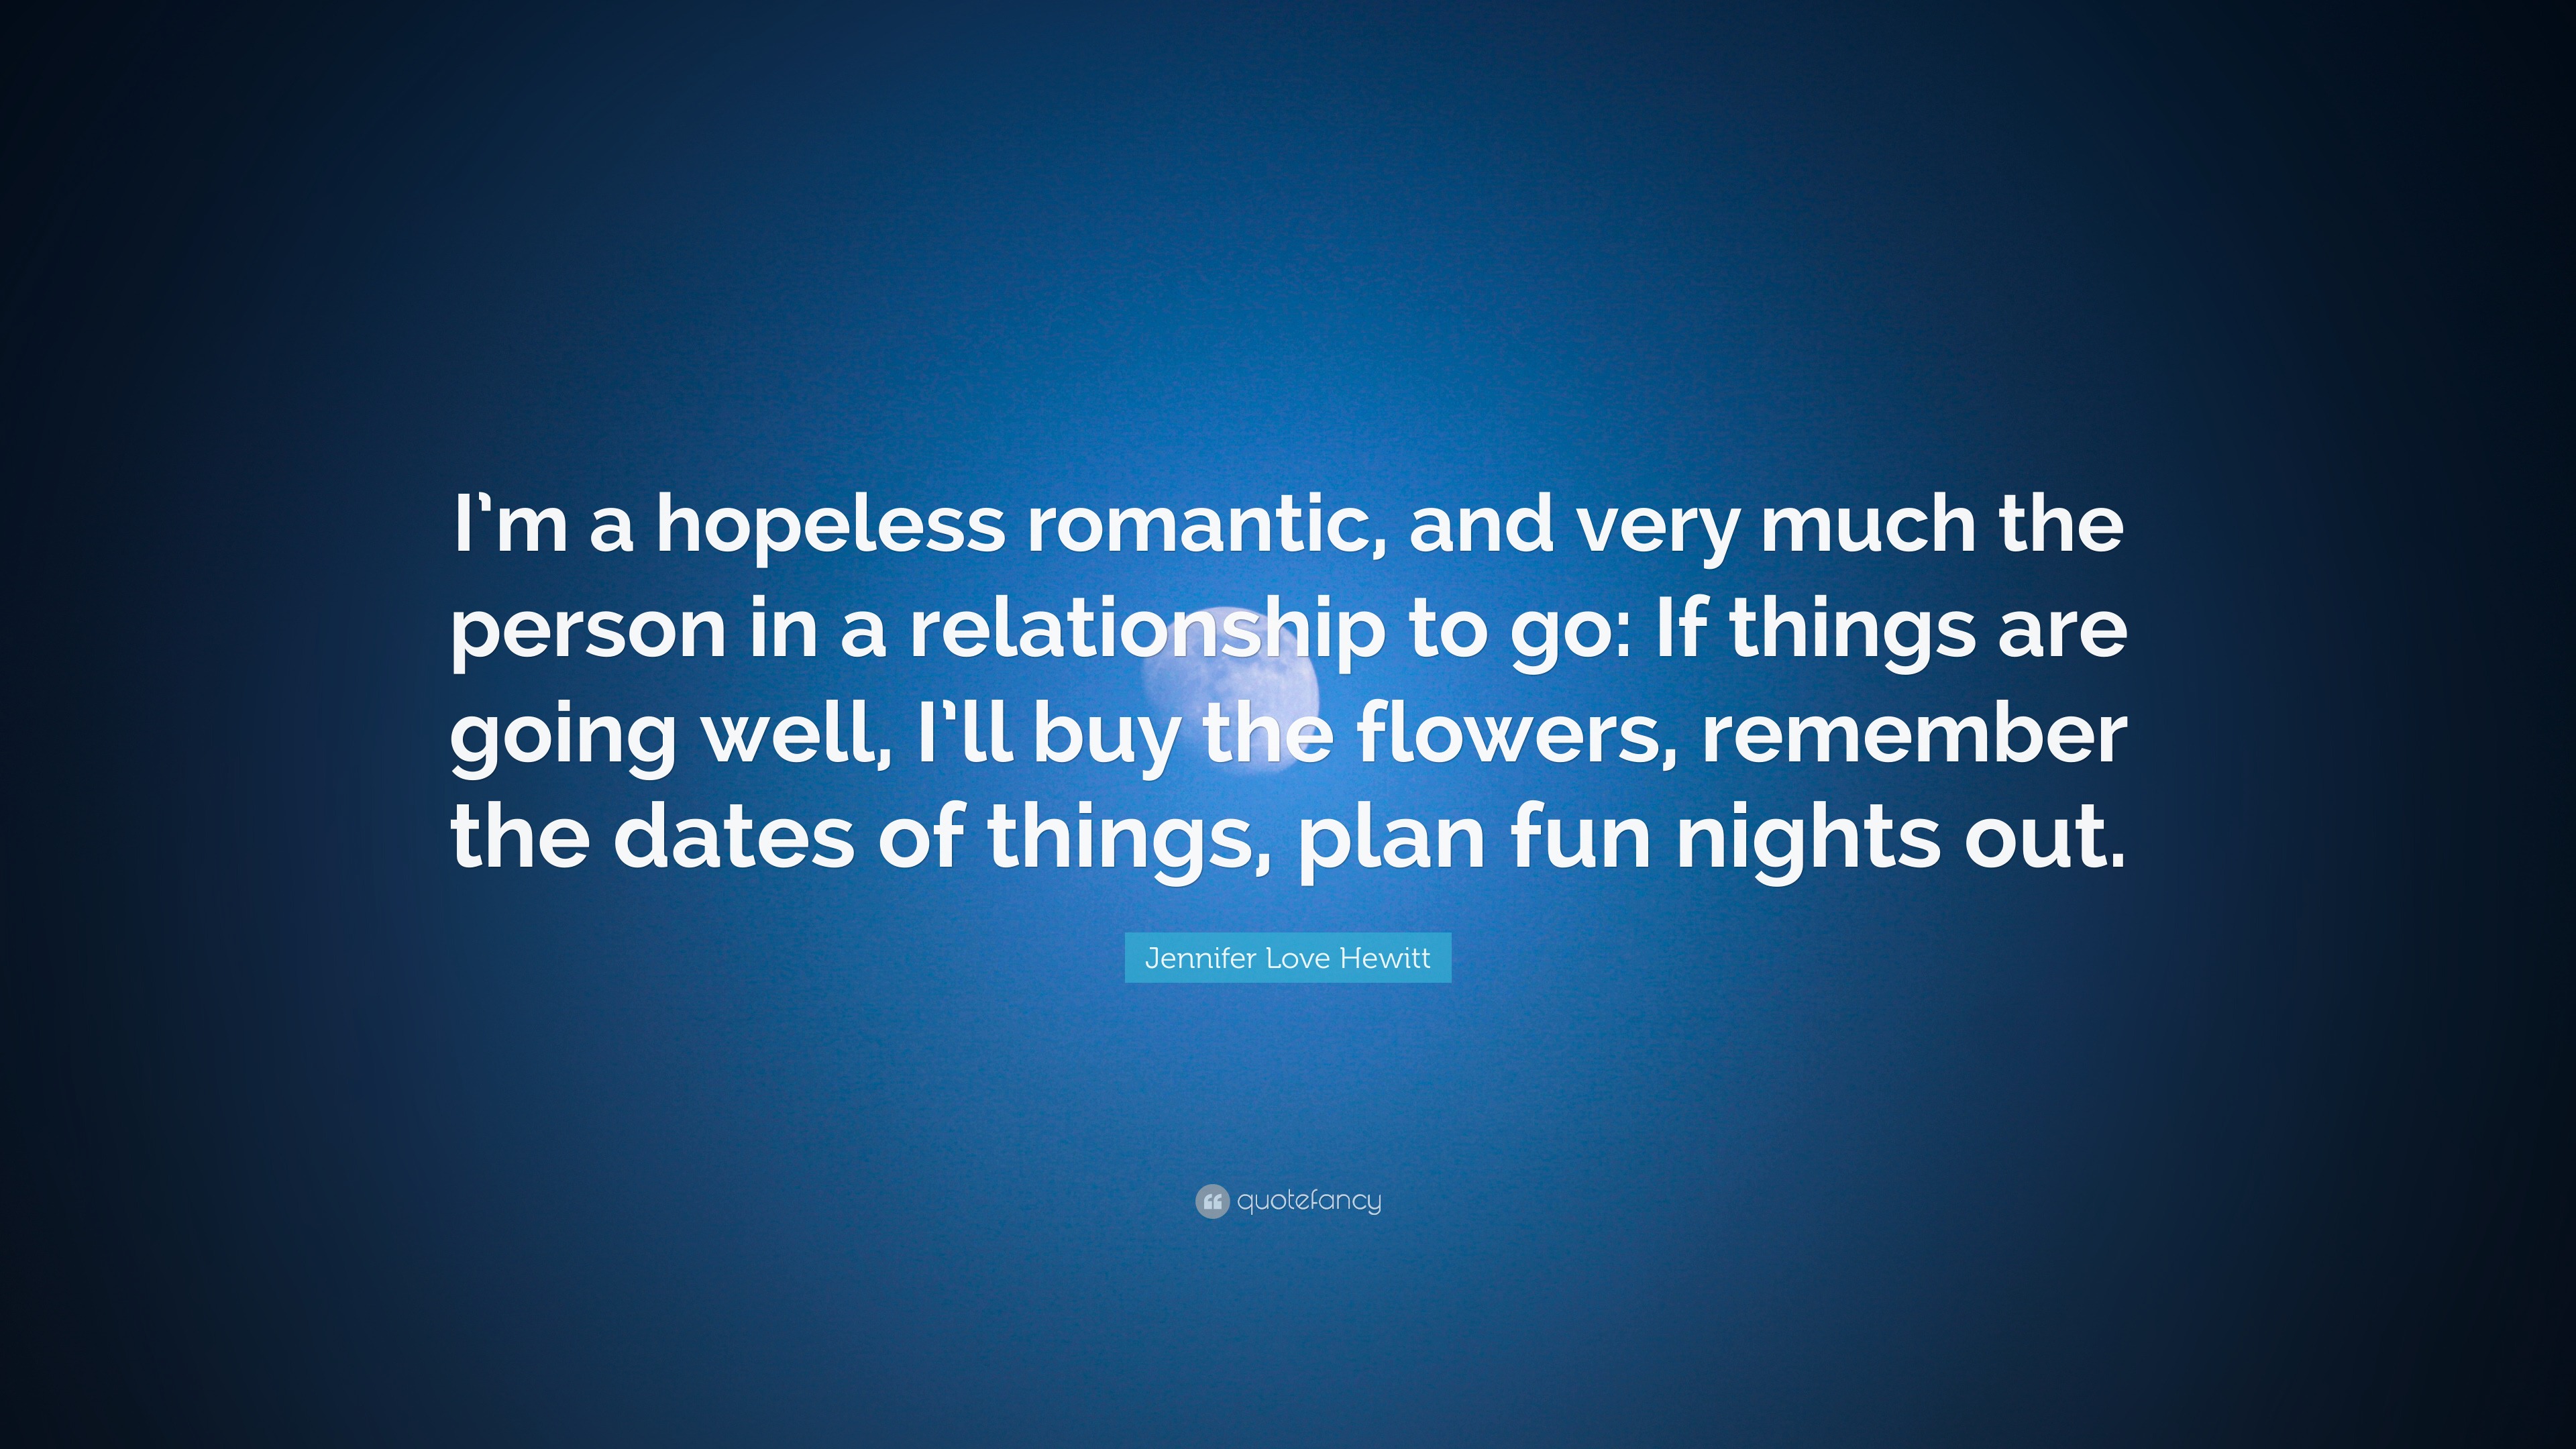 From one hopeless romantic to the others. - post - Imgur